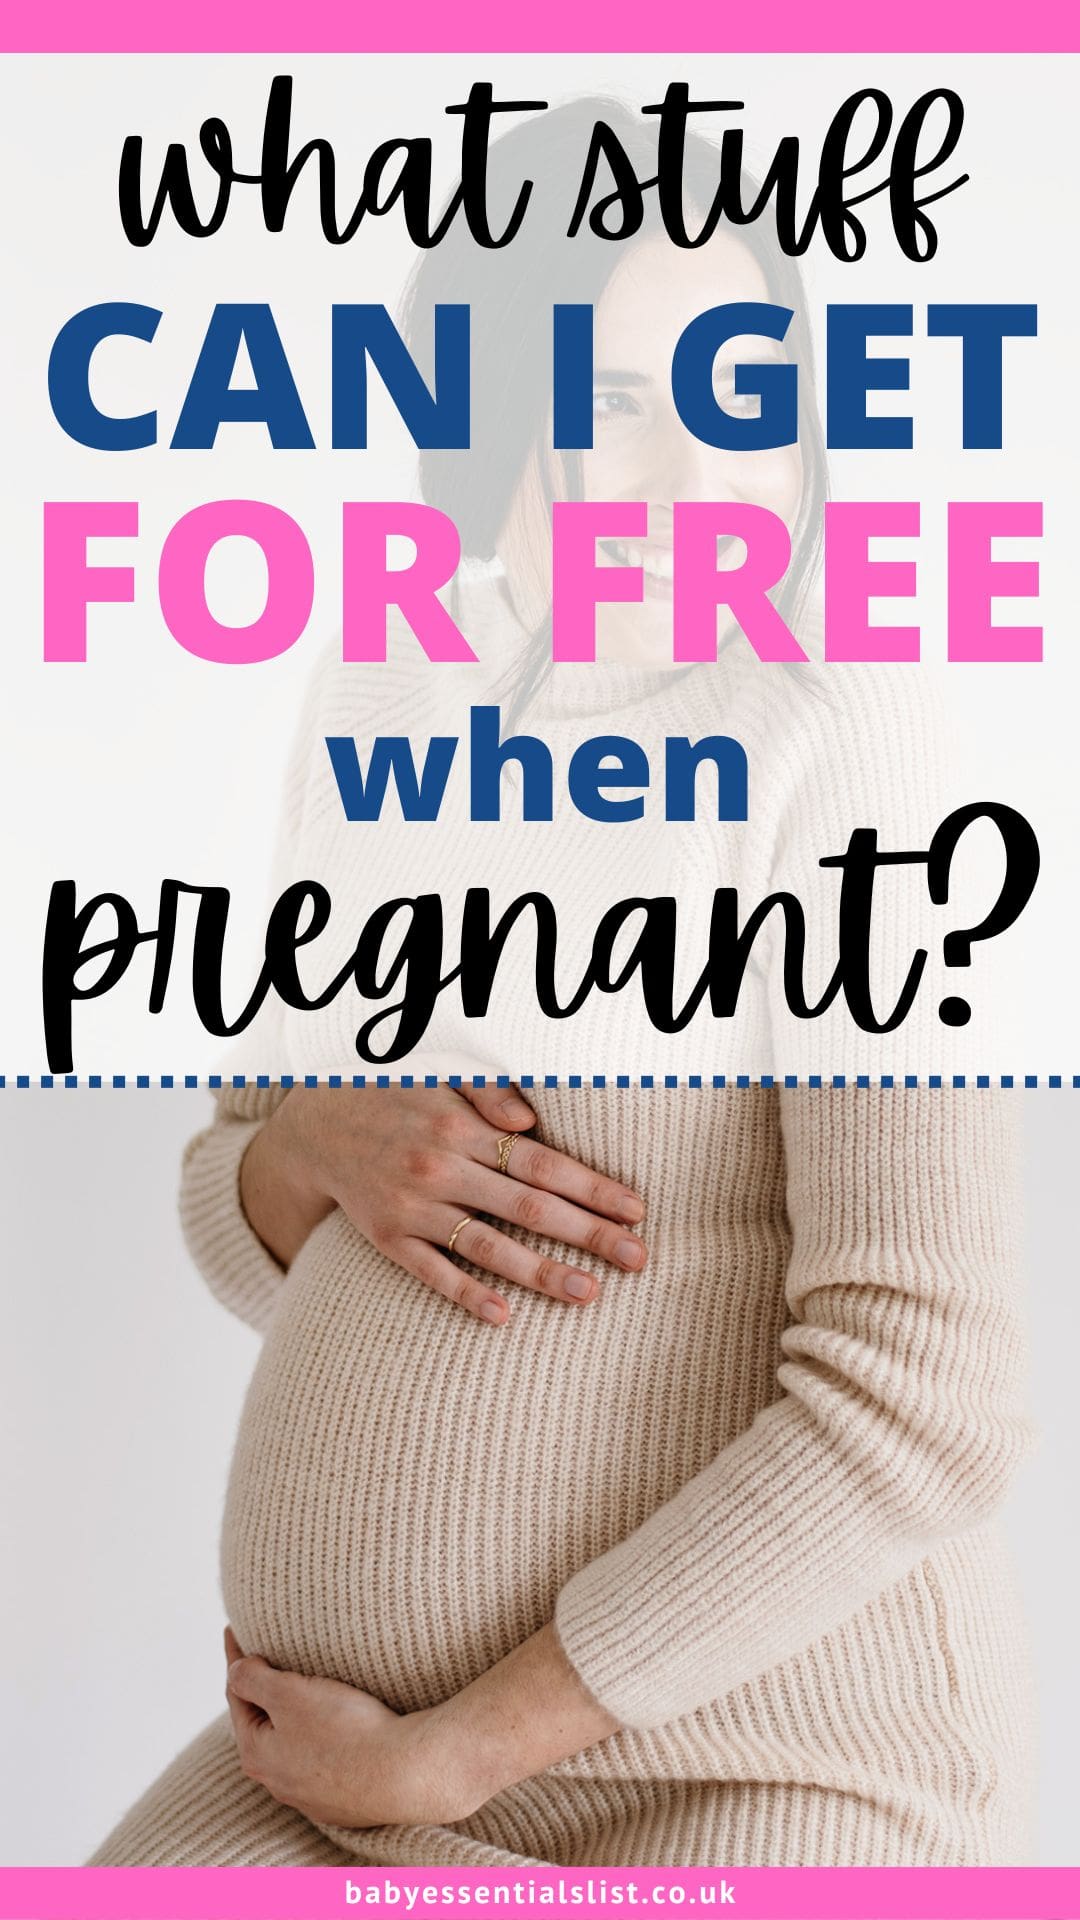 What stuff can I get for free when pregnant?